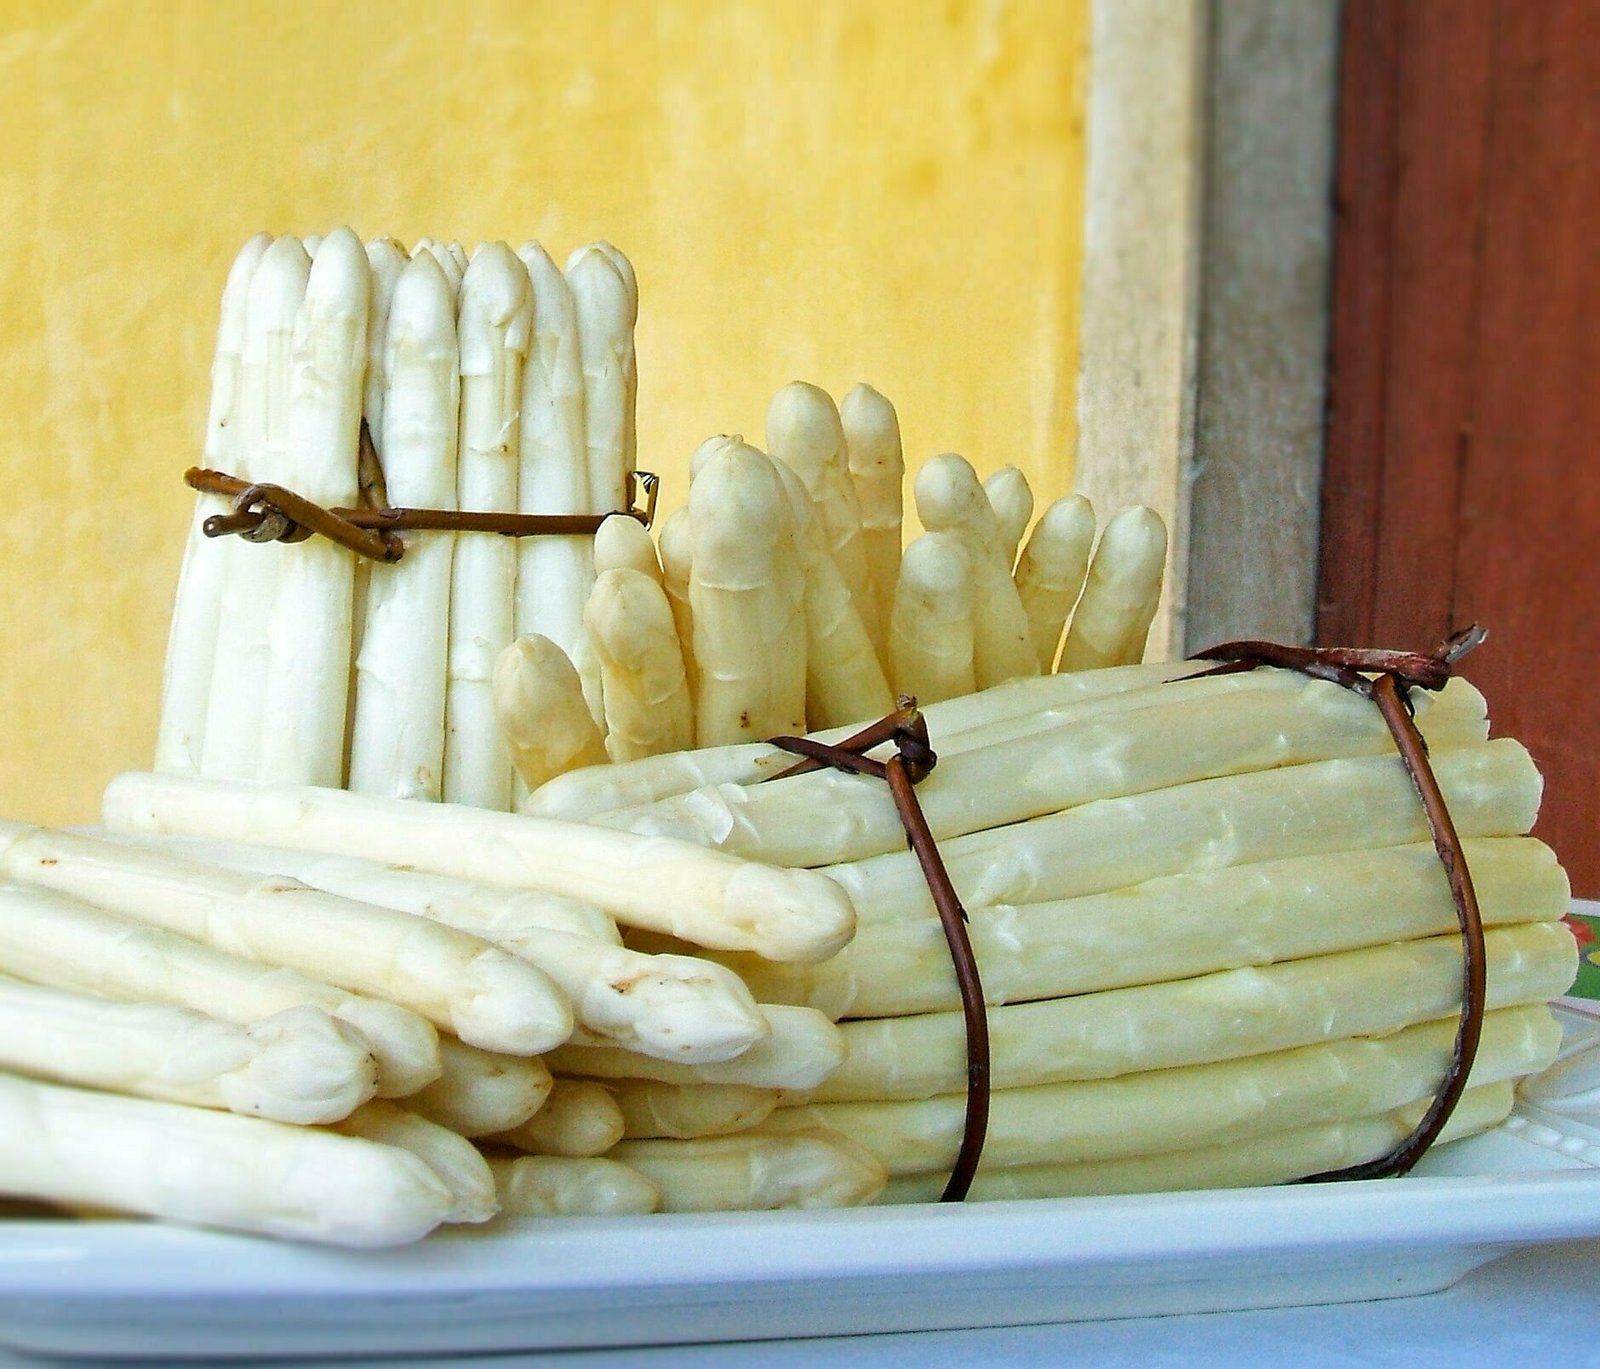 3 large bunches of white asparagus stalks sits on a counter.